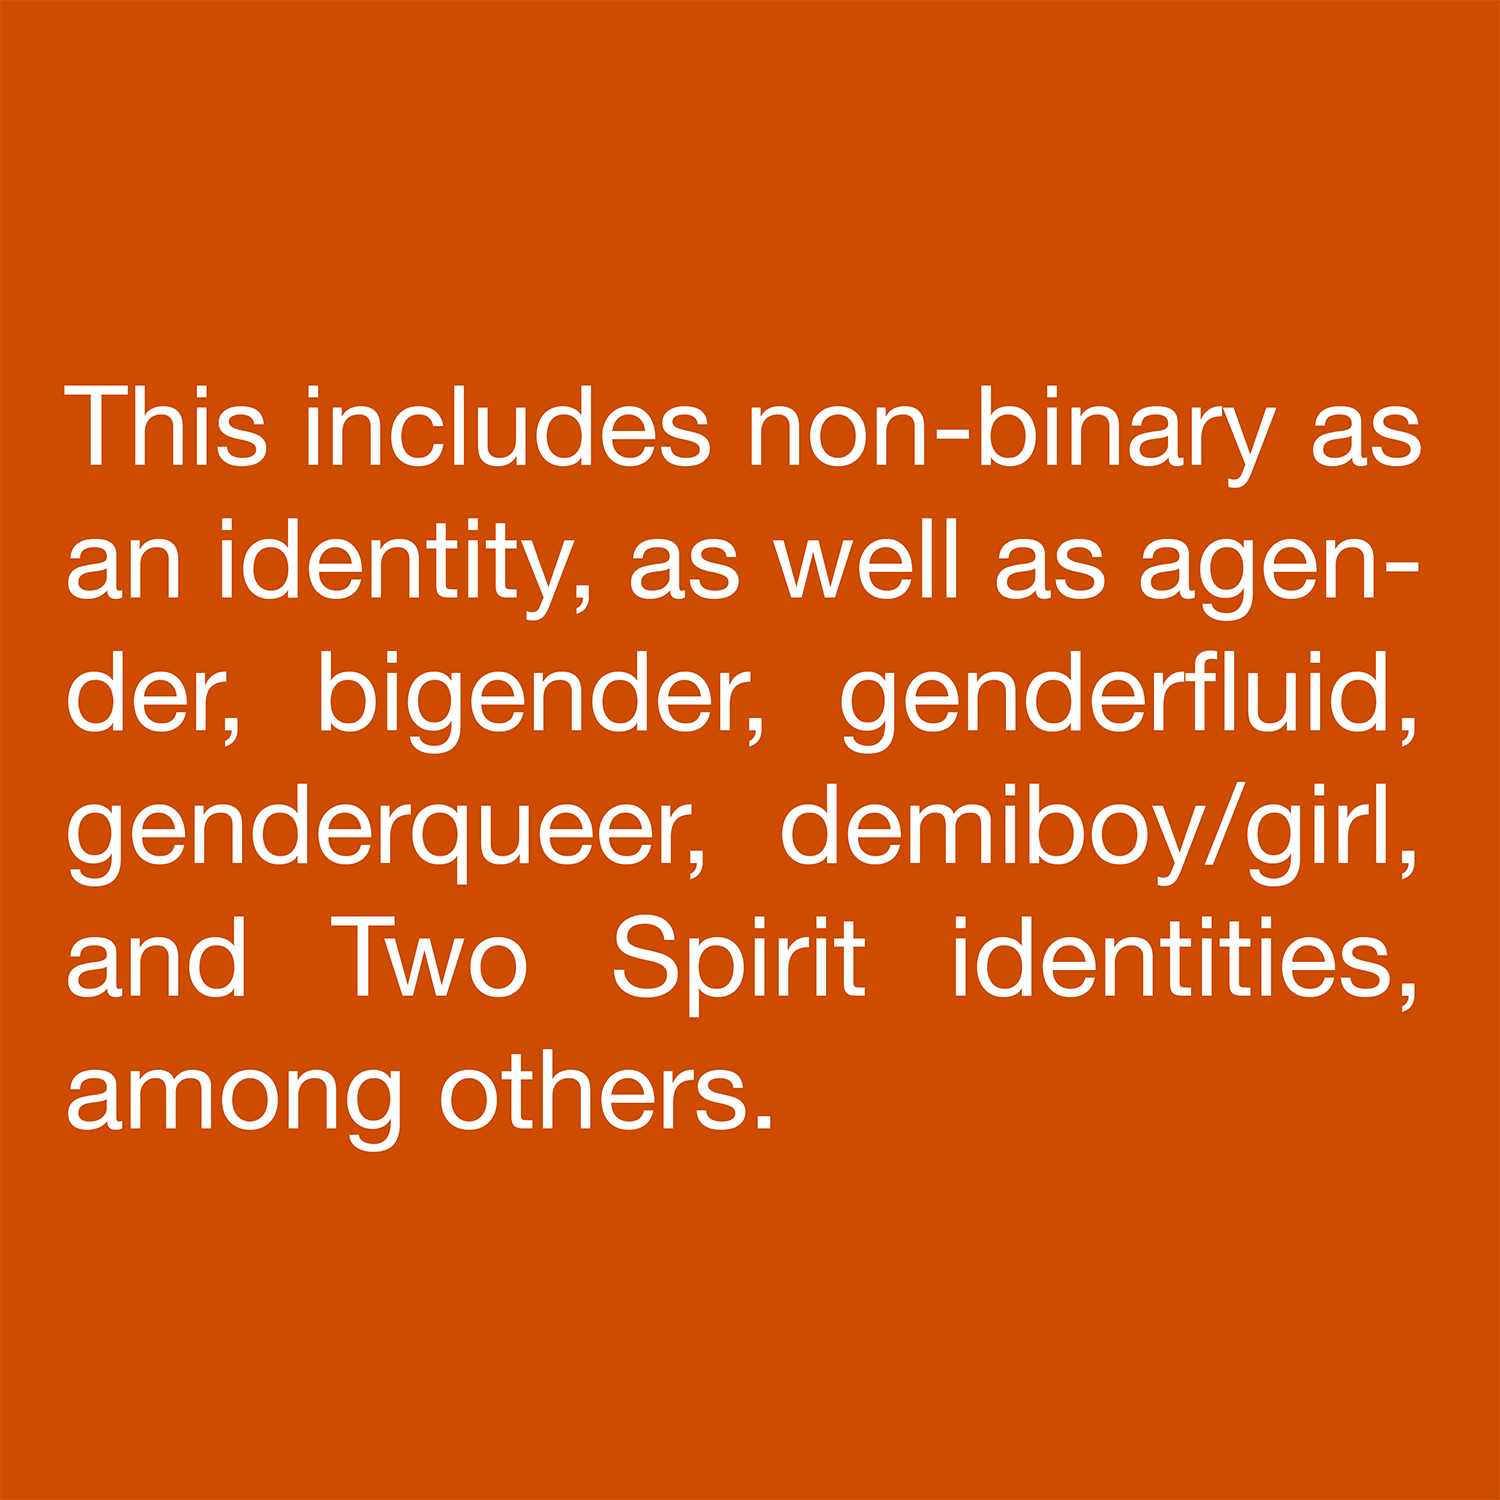  This includes non-binary as an identity, as well as agender, bigender, genderfluid, genderqueer, demiboy/girl, and Two Spirit identities, among others. 